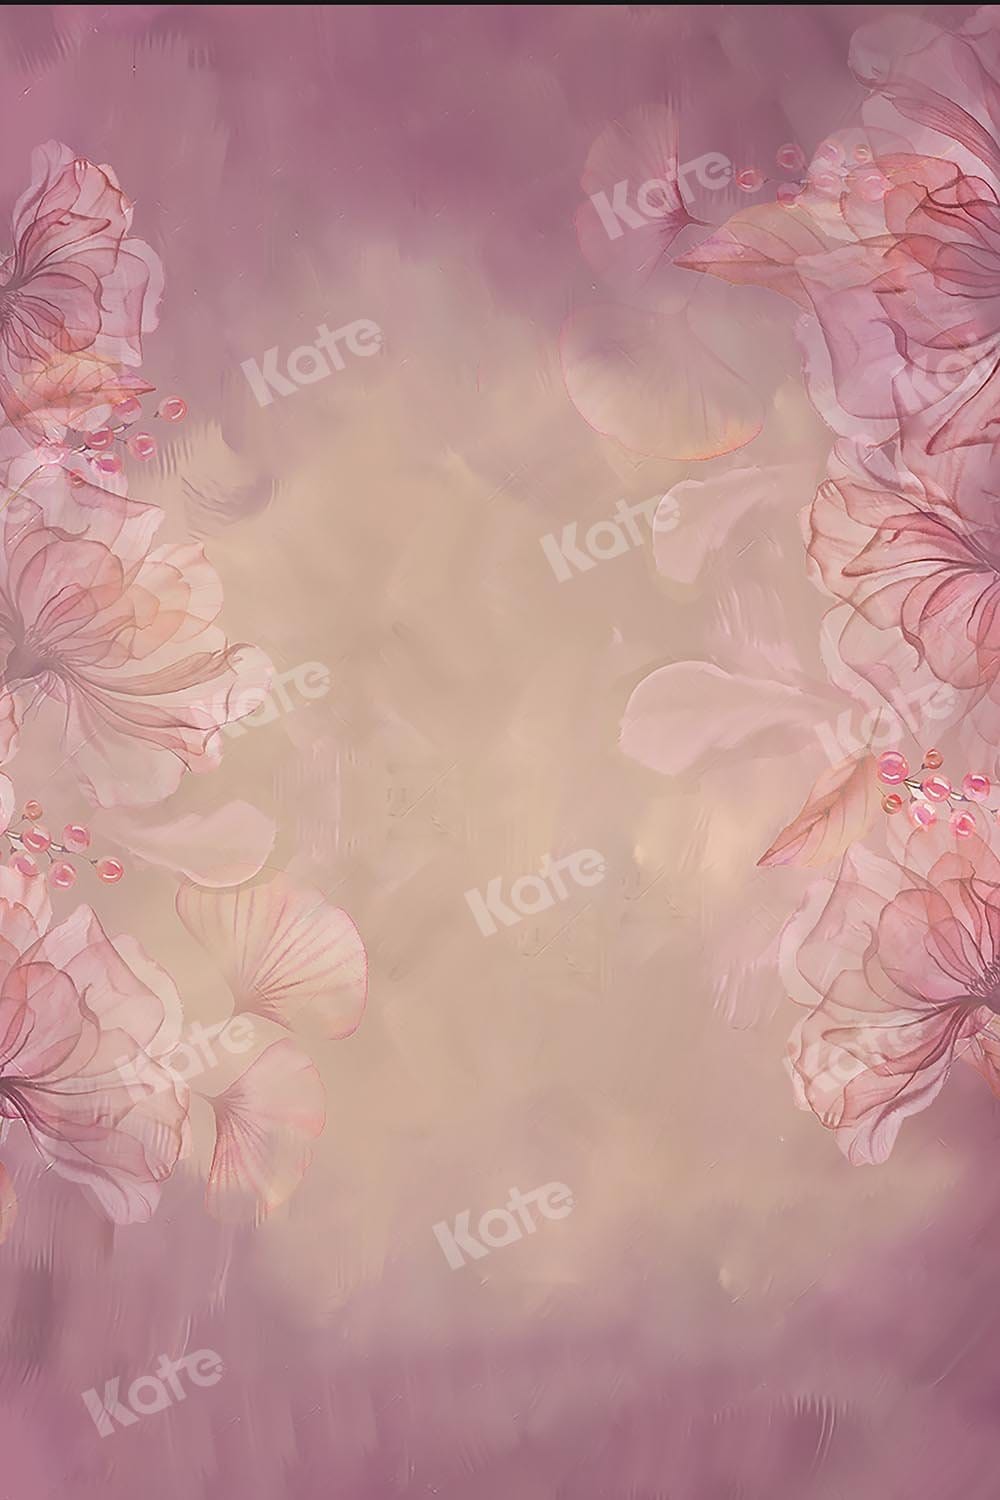 Kate Fine Art Floral Blurry Pink Backdrop Designed by GQ